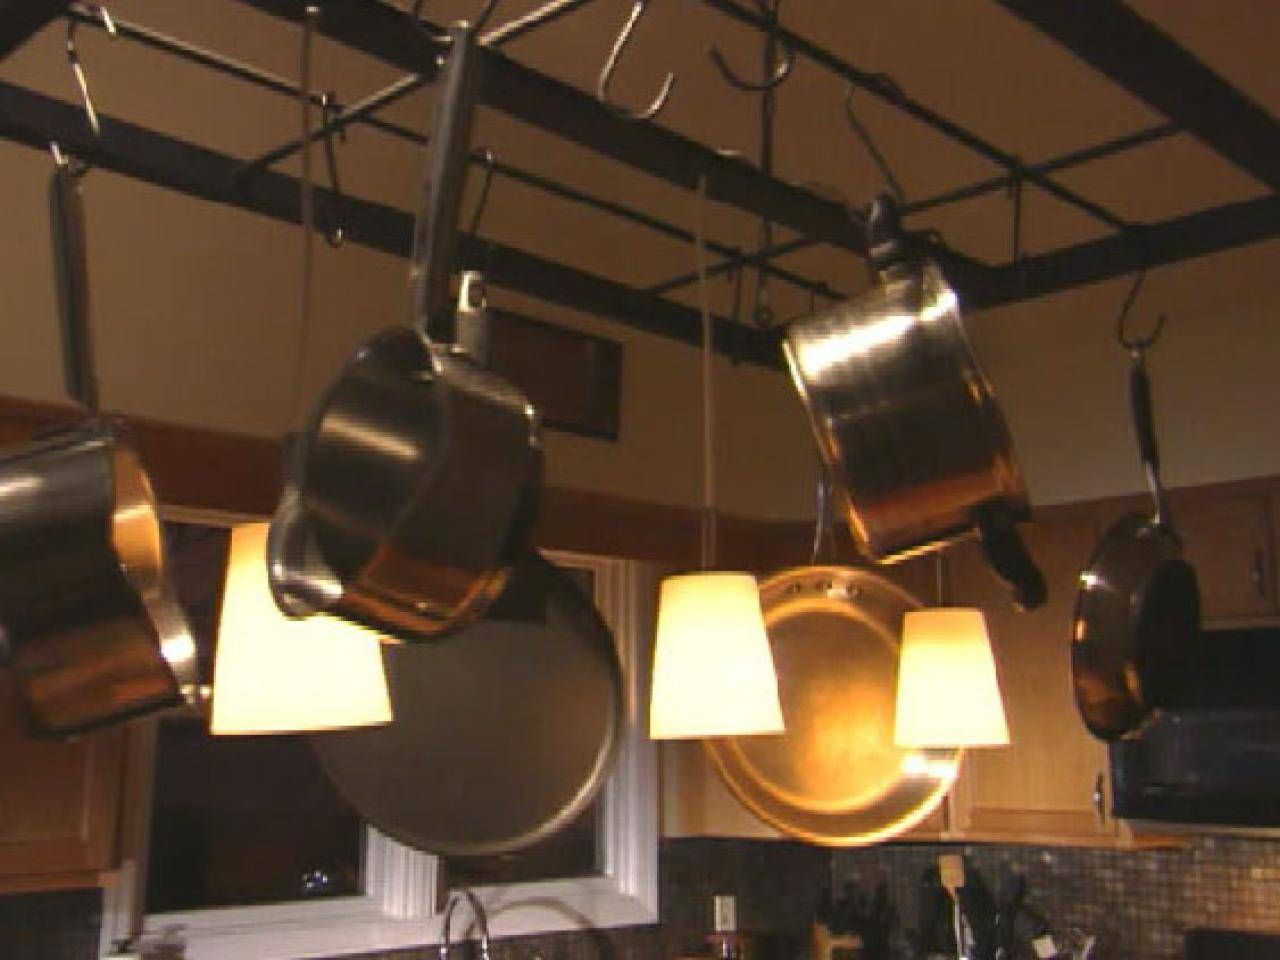 Build A Hanging Pot Rack | Hgtv Intended For Kitchen Pendant Lights With Pot Rack (View 6 of 15)